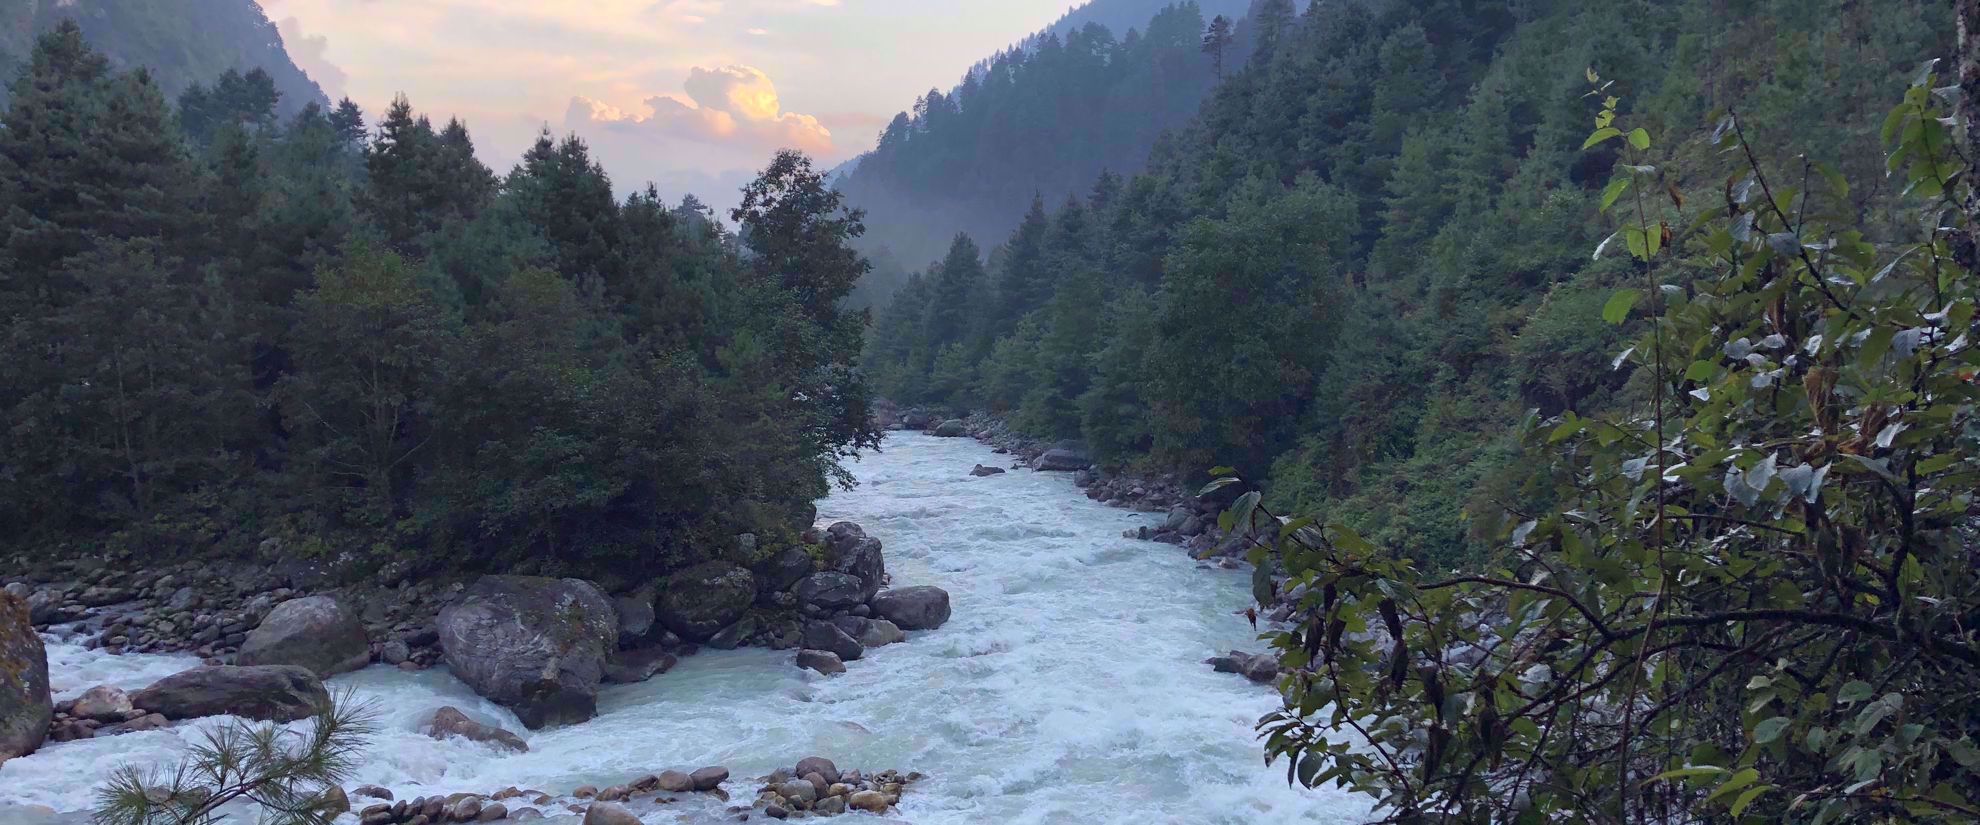 fast moving river in nepal with boulders and trees